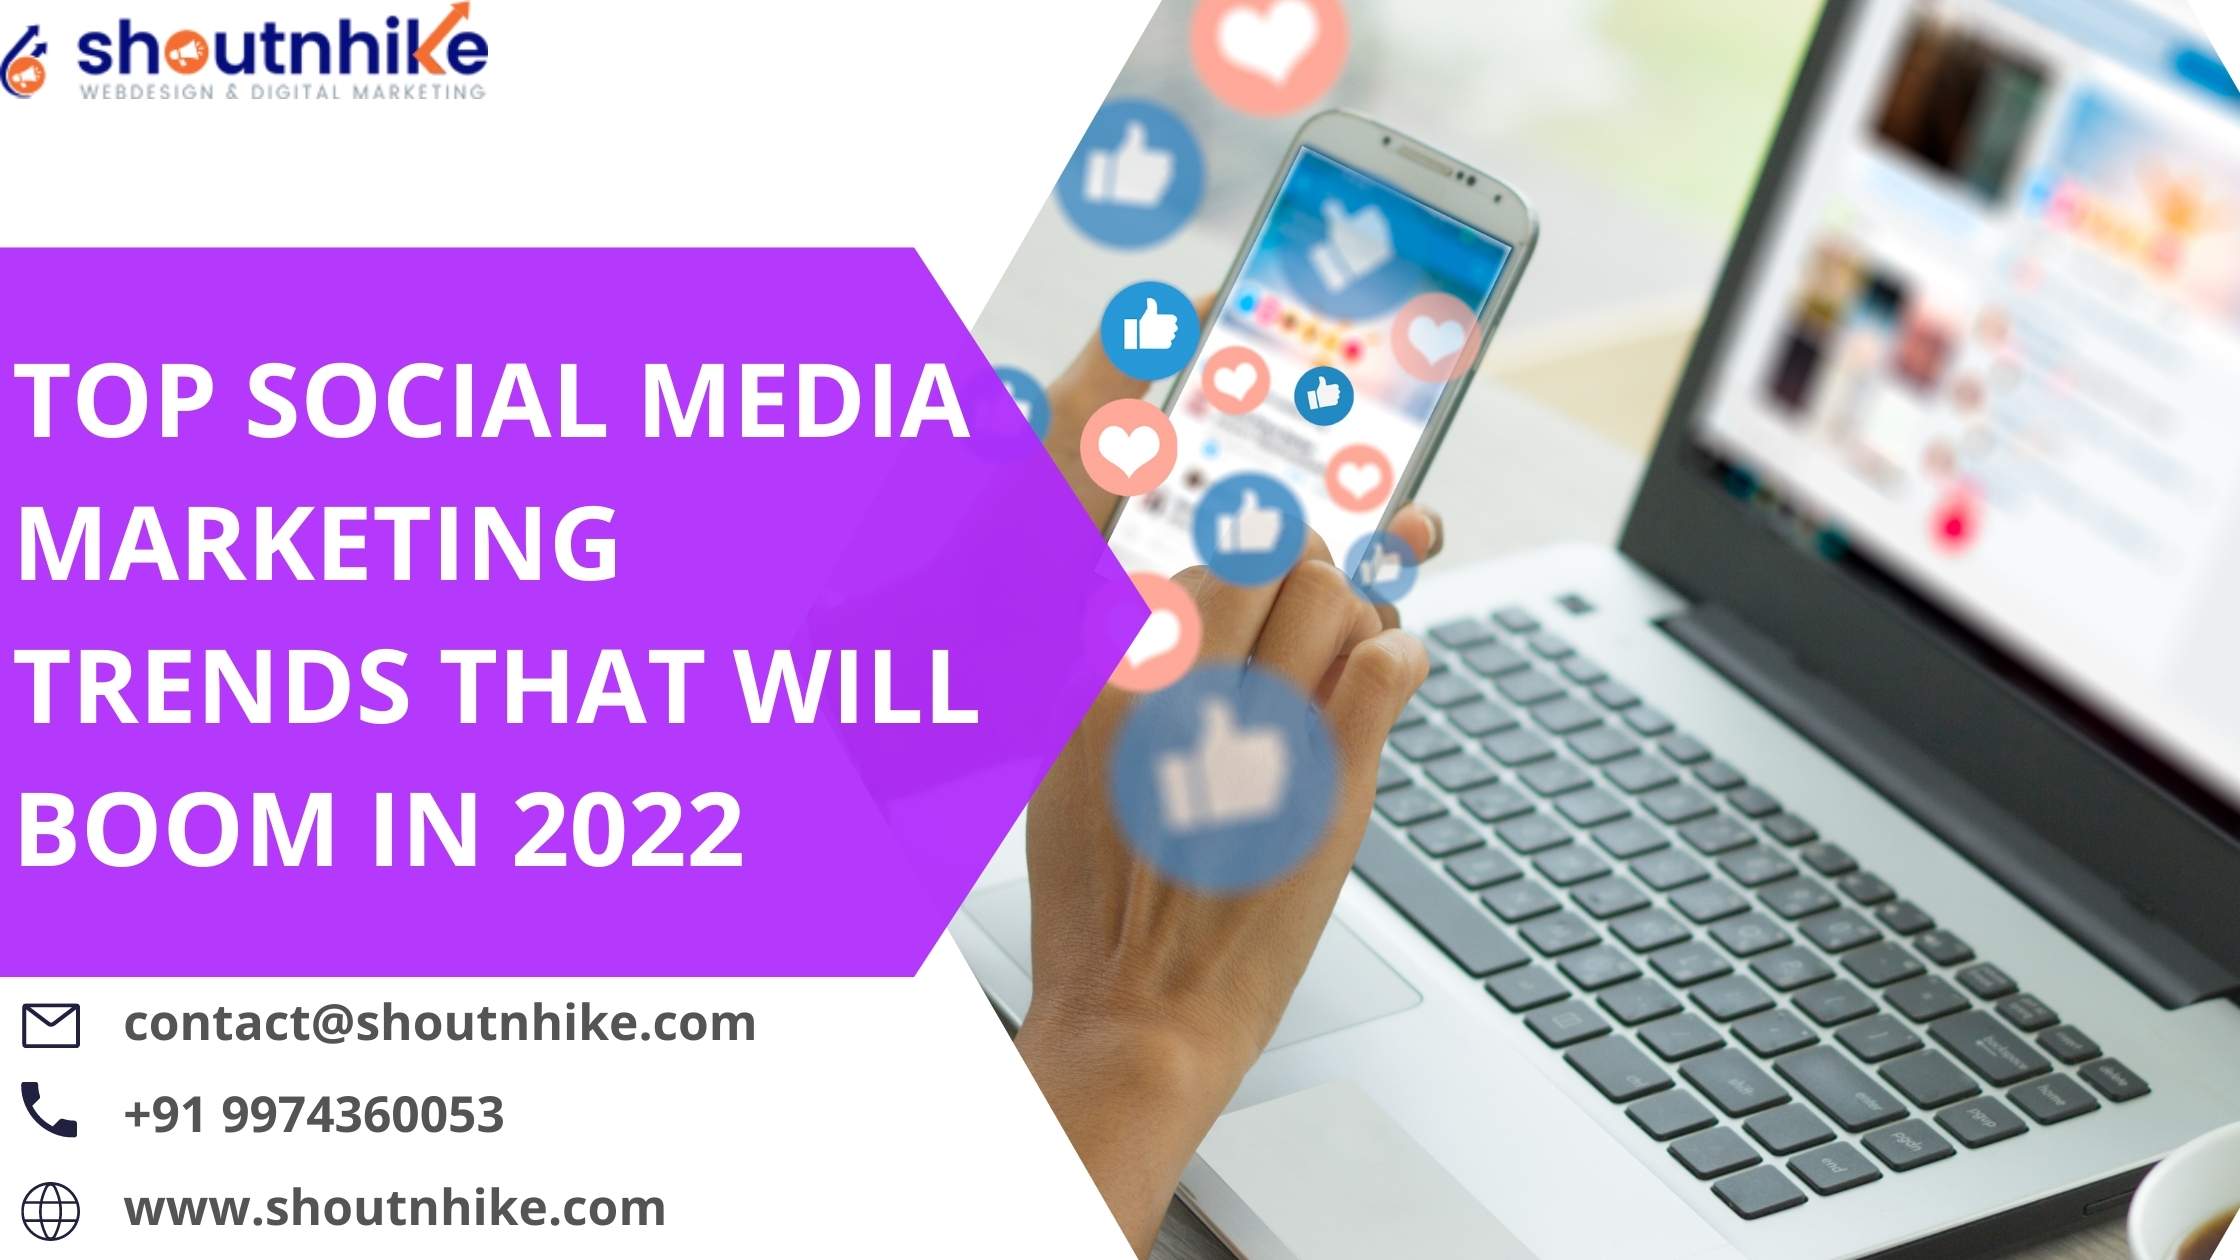 Top Social Media Marketing Trends That Will Boom in 2022